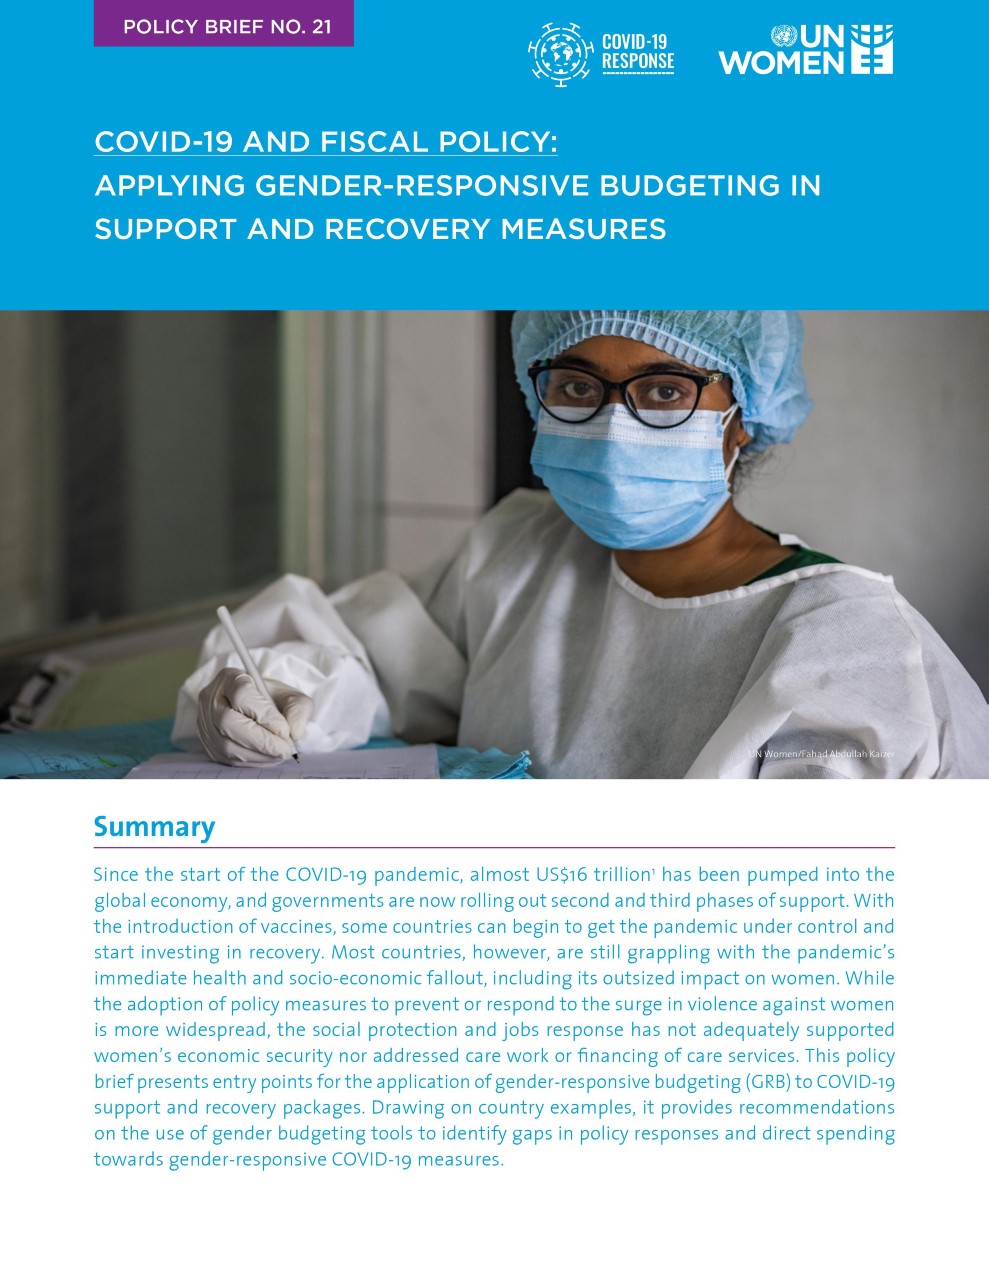 COVID-19 and fiscal policy: Applying gender-responsive budgeting in support and recovery measures